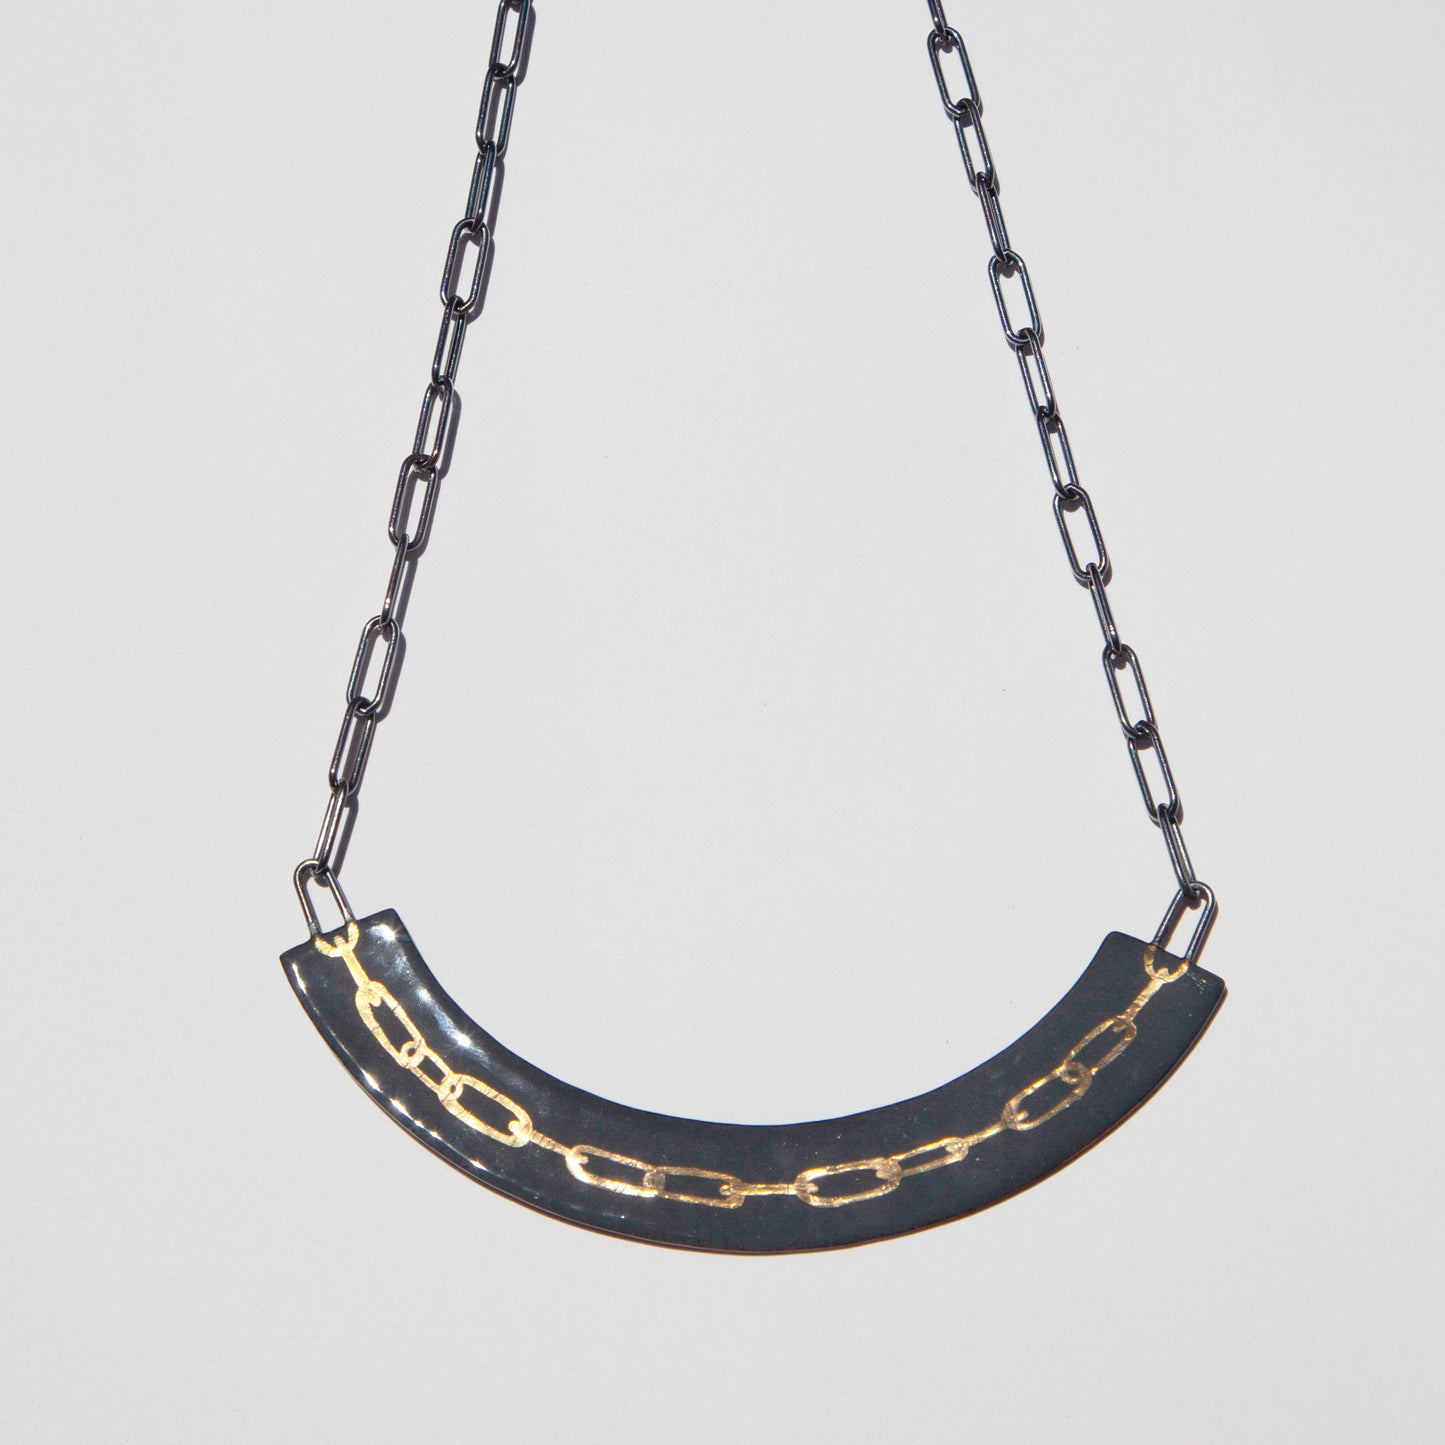 Black and Gold Chain Necklace - Swoop